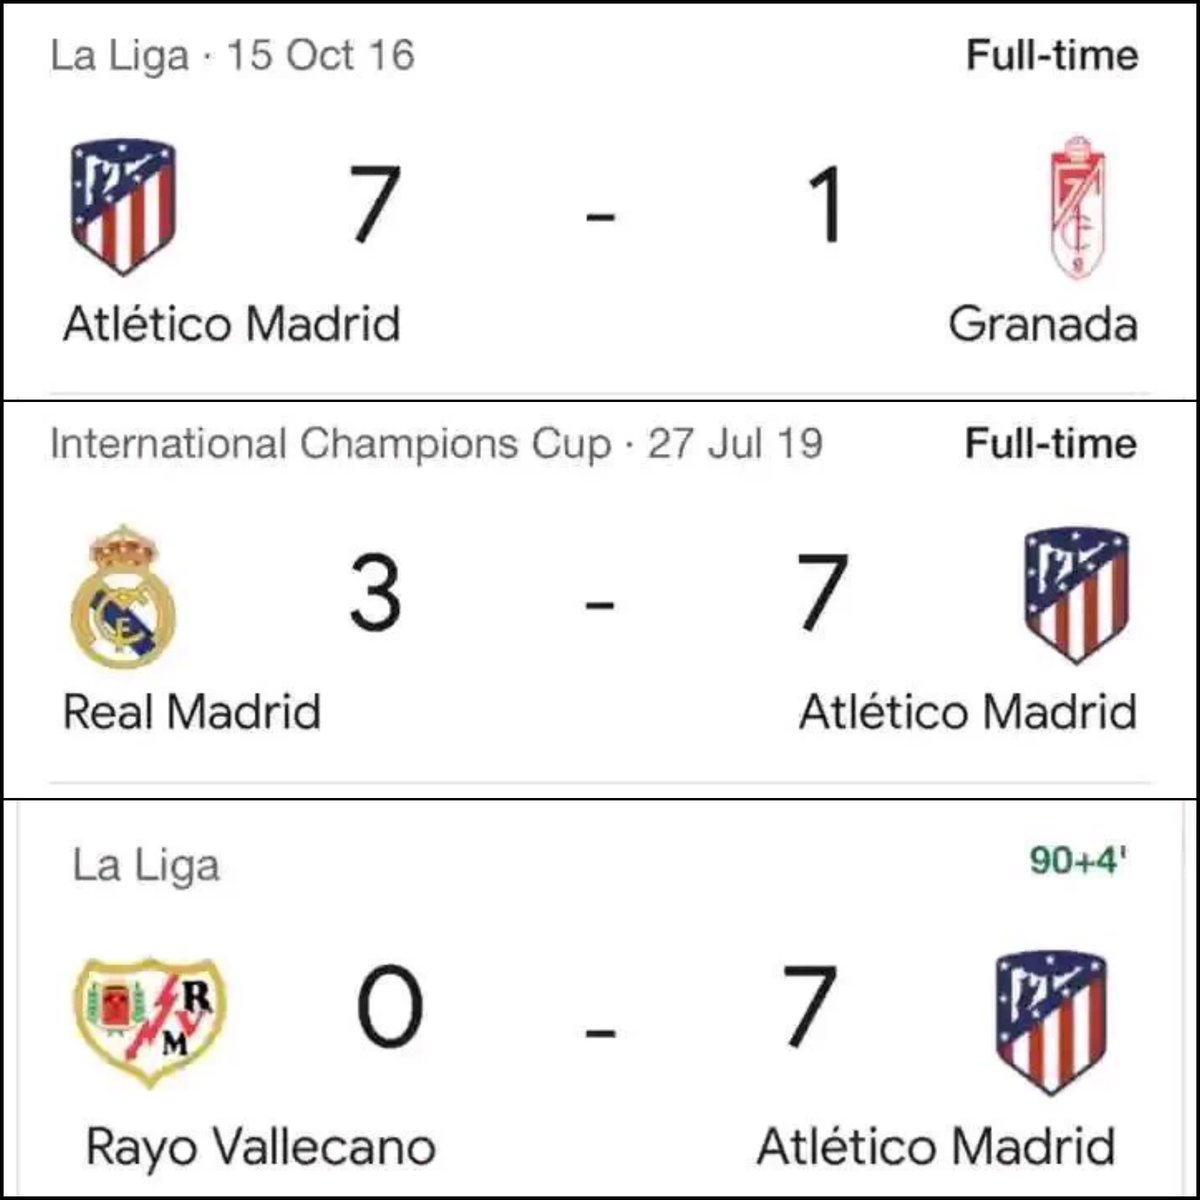 Atletico Madrid loves scoring 7 goals against small teams